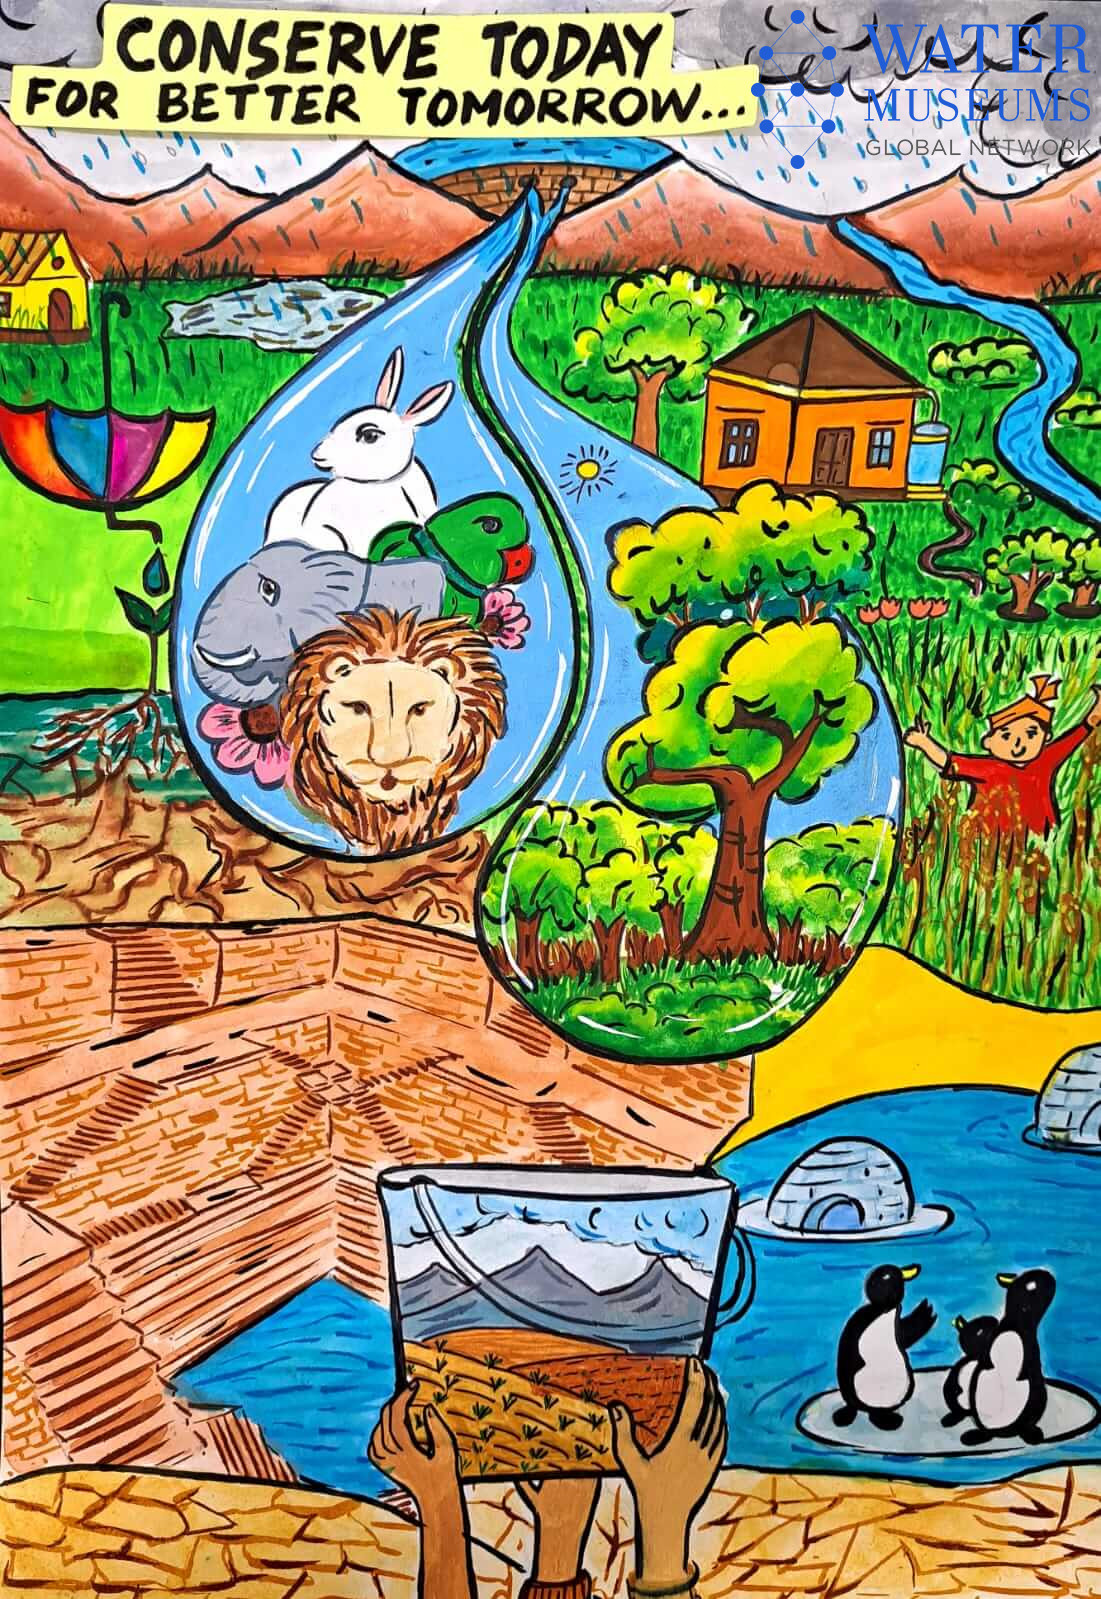 Water Conservation Drawing | The EcoBuzz